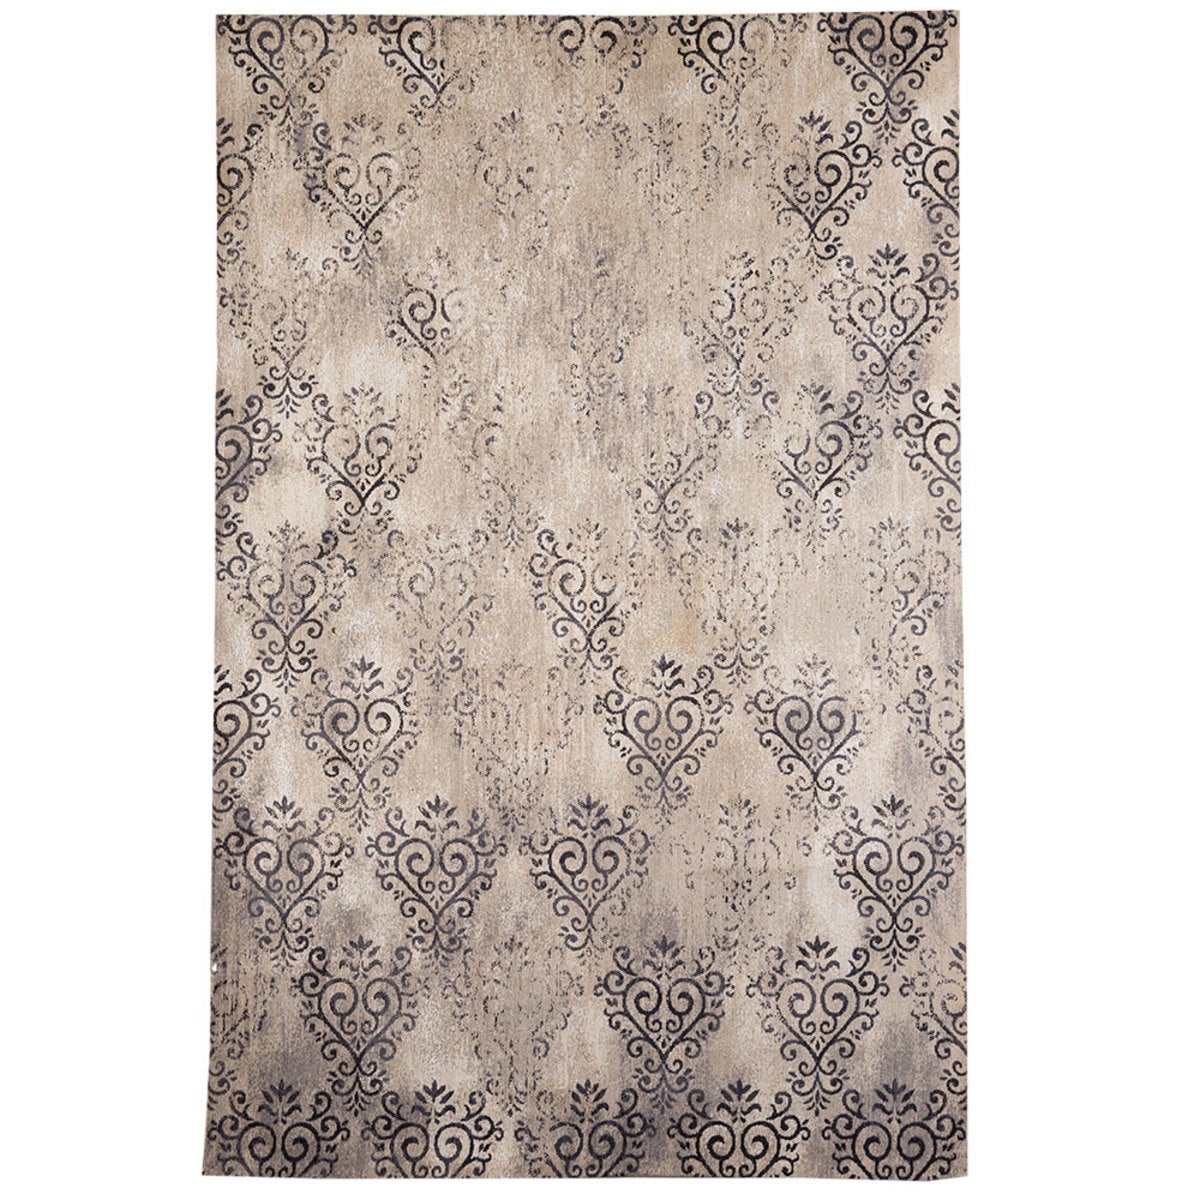 Antibes Recycled Cotton Rug Collection